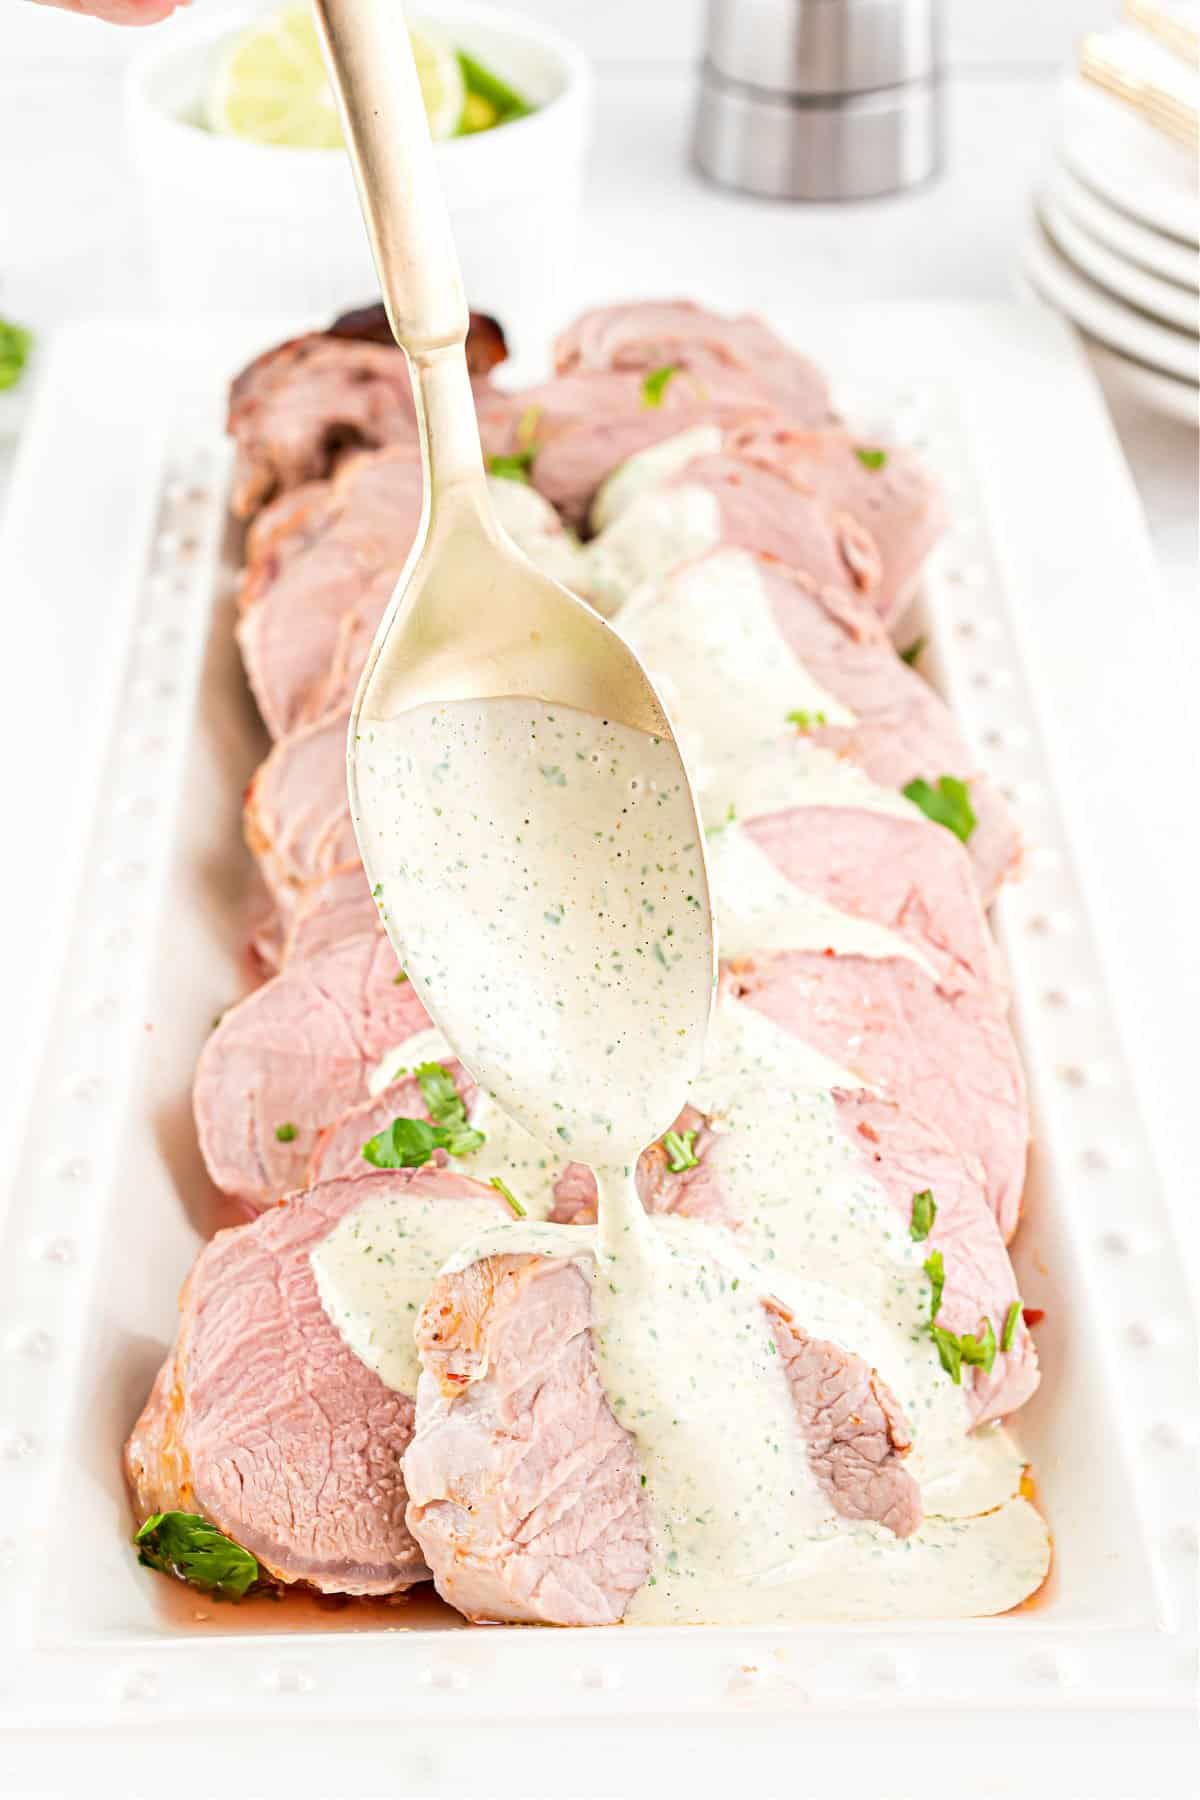 Cilantro lime sauced being spooned over slices of pork tenderloin.